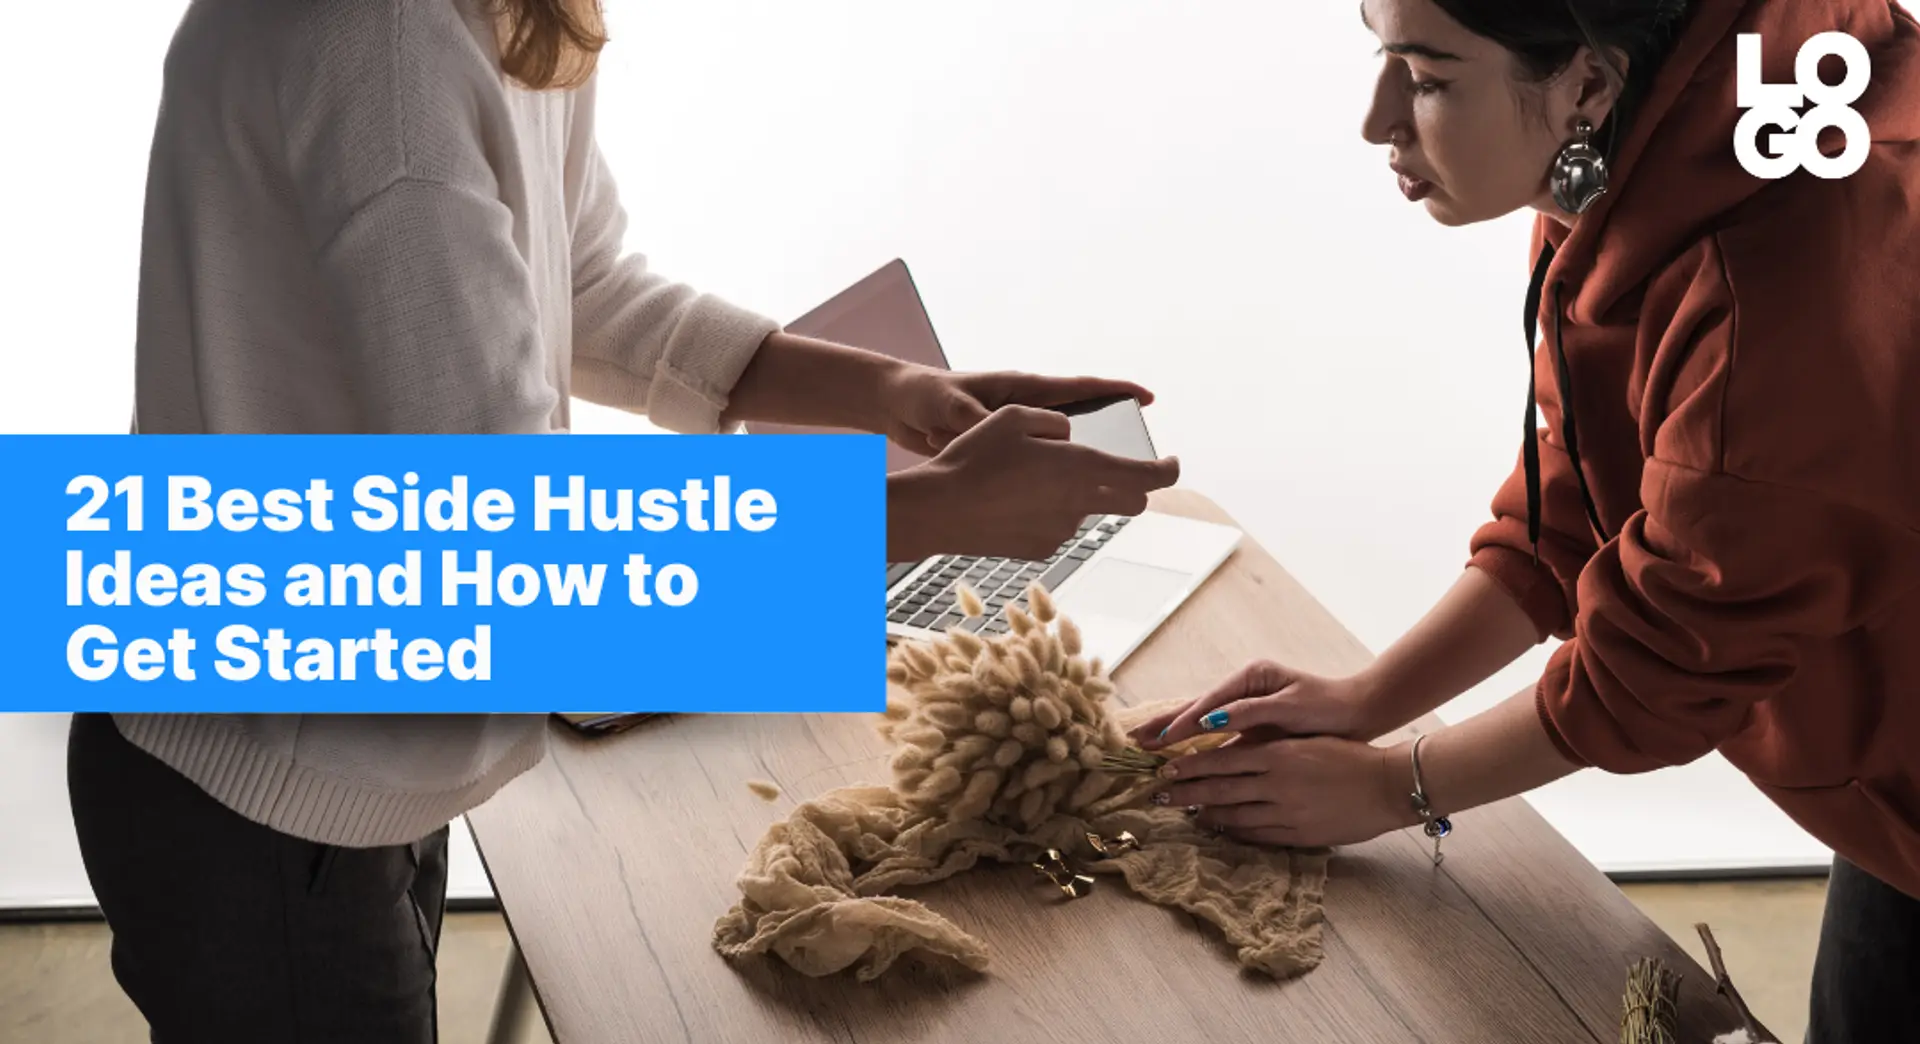 21 Best Side Hustle Ideas and How to Get Started